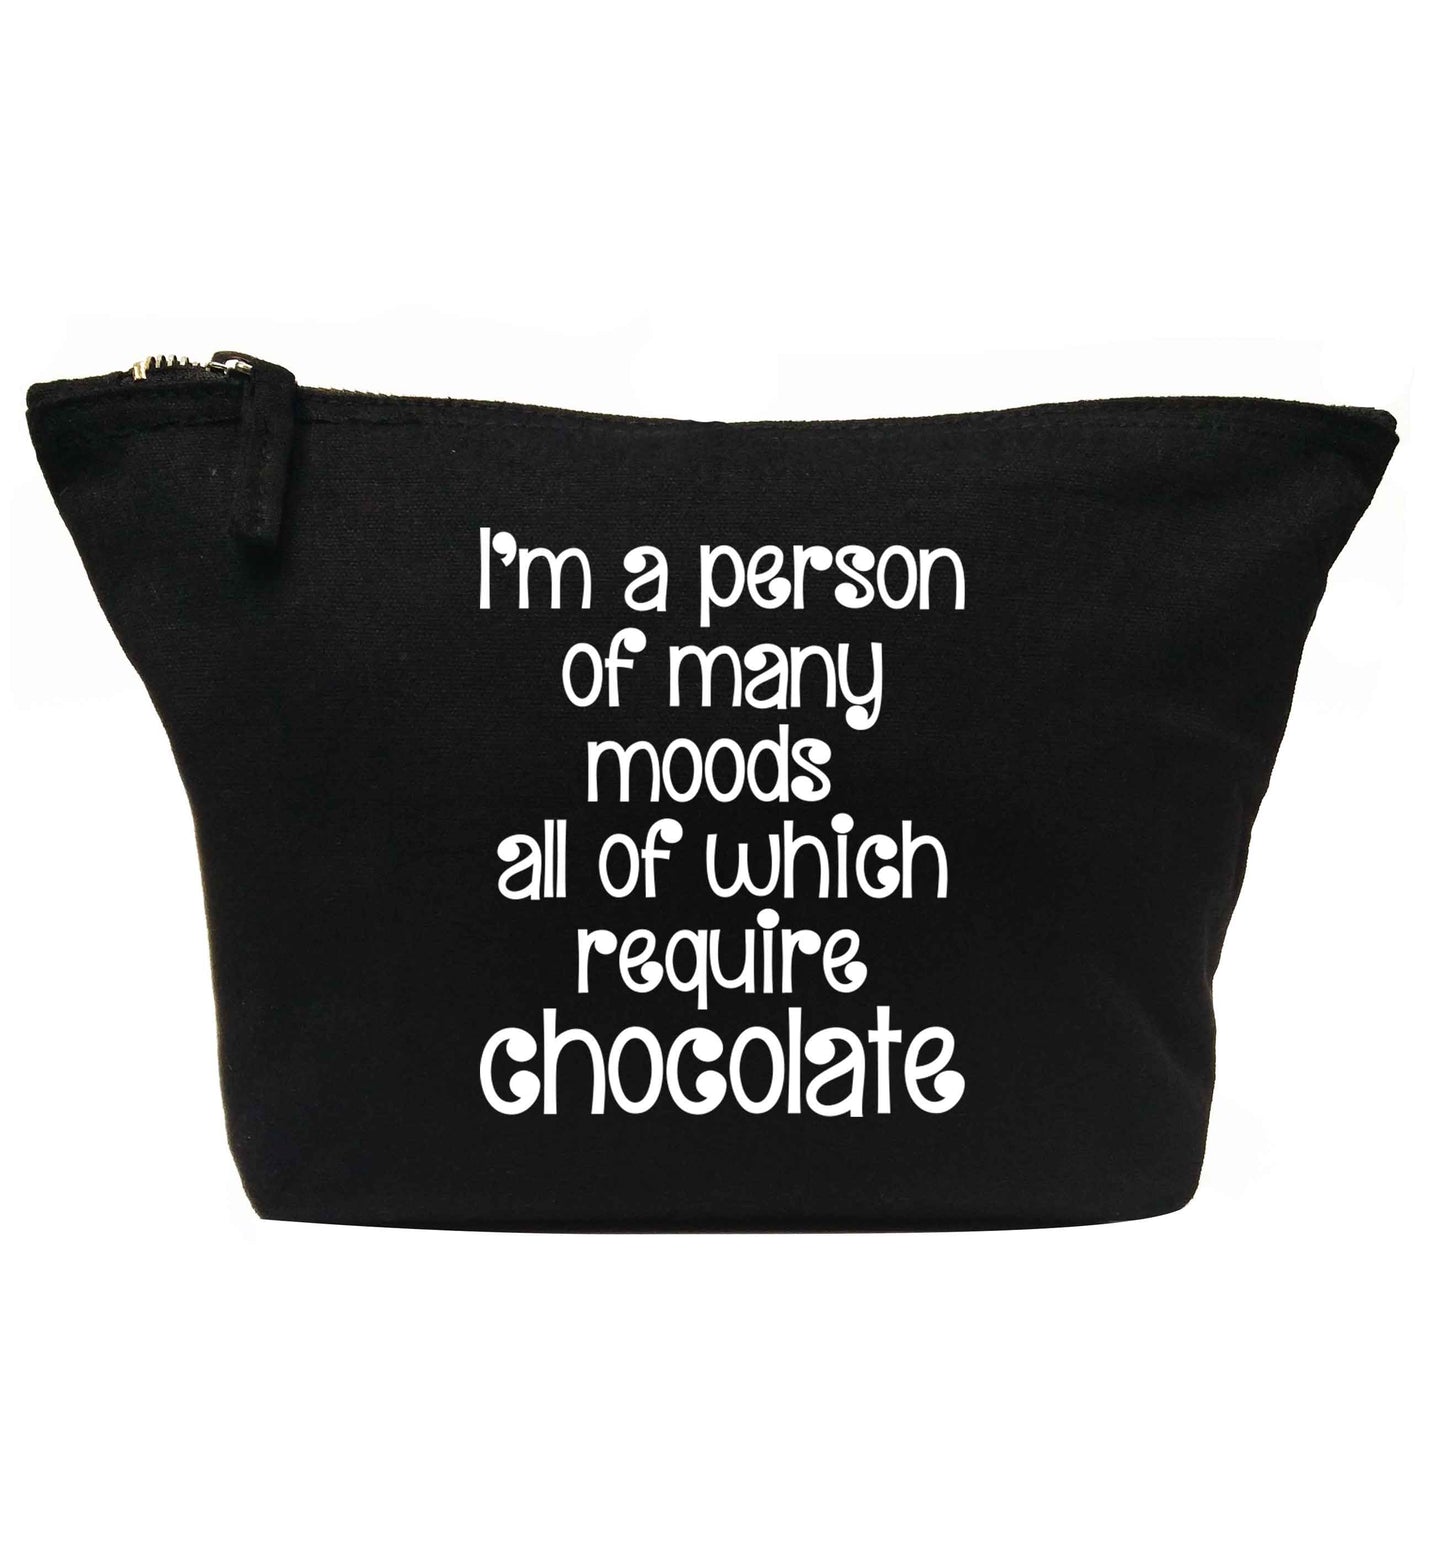 I'm a person of many moods all of which require chocolate | Makeup / wash bag